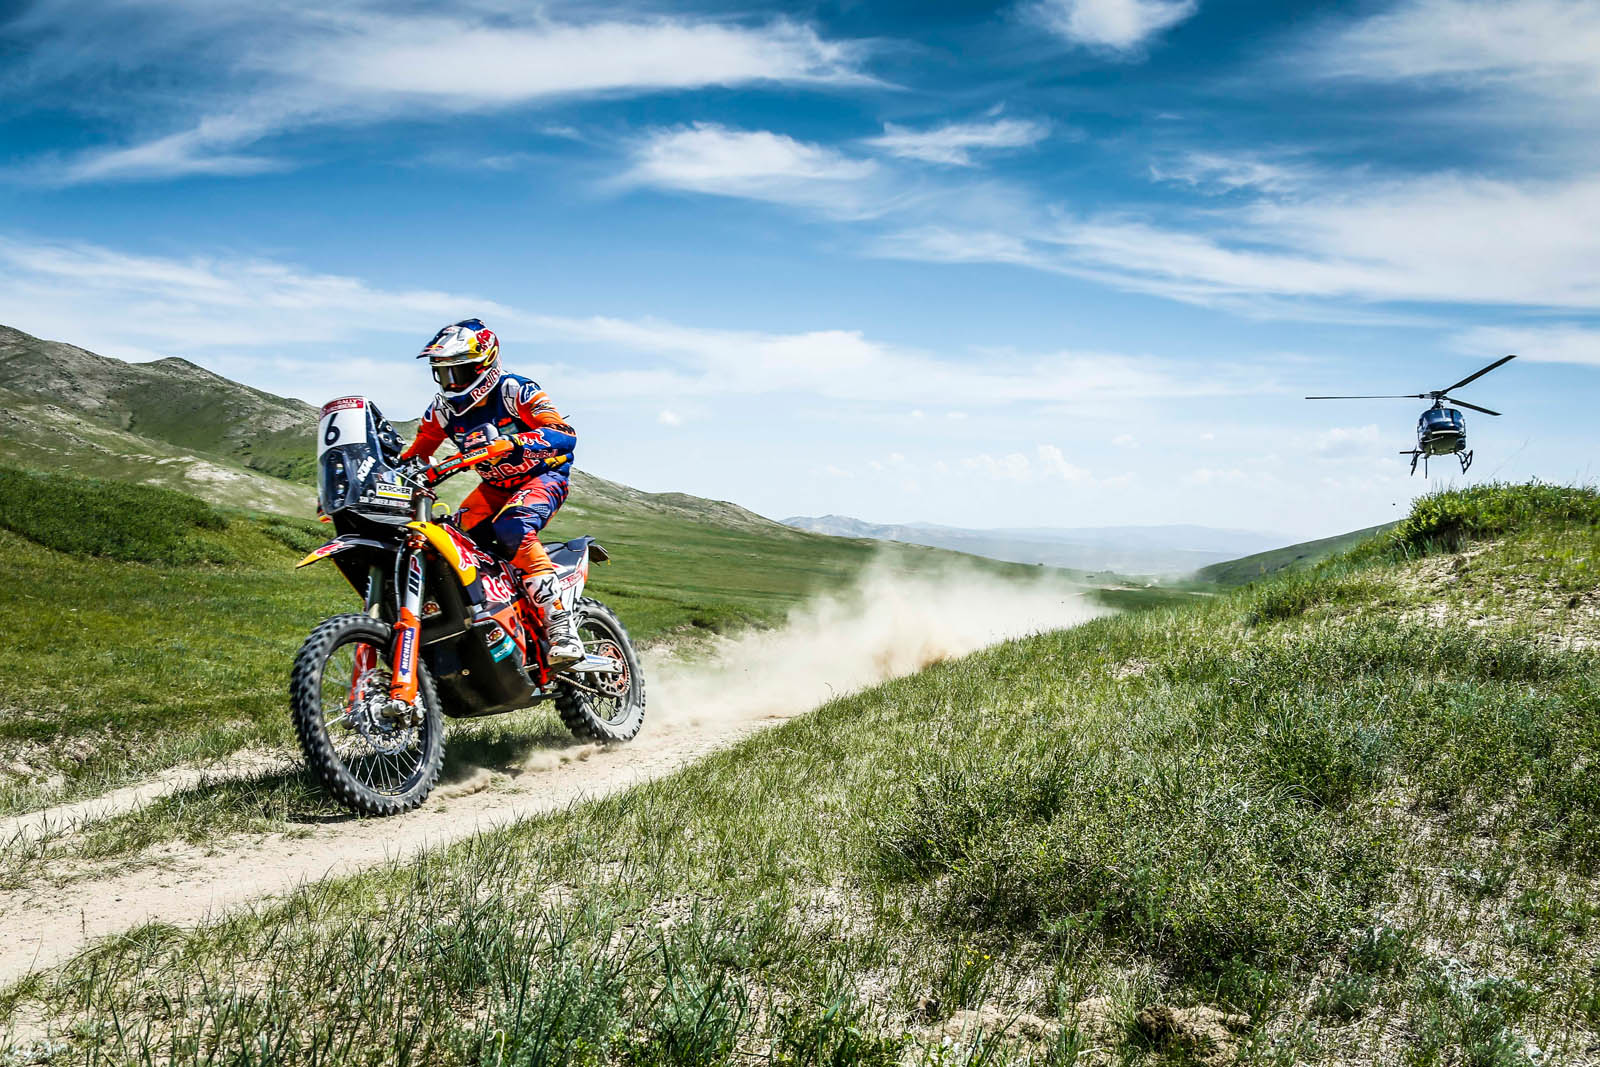 2020 FIM Cross-Country Rally World Championship and FIM Bajas World Cup dates announced